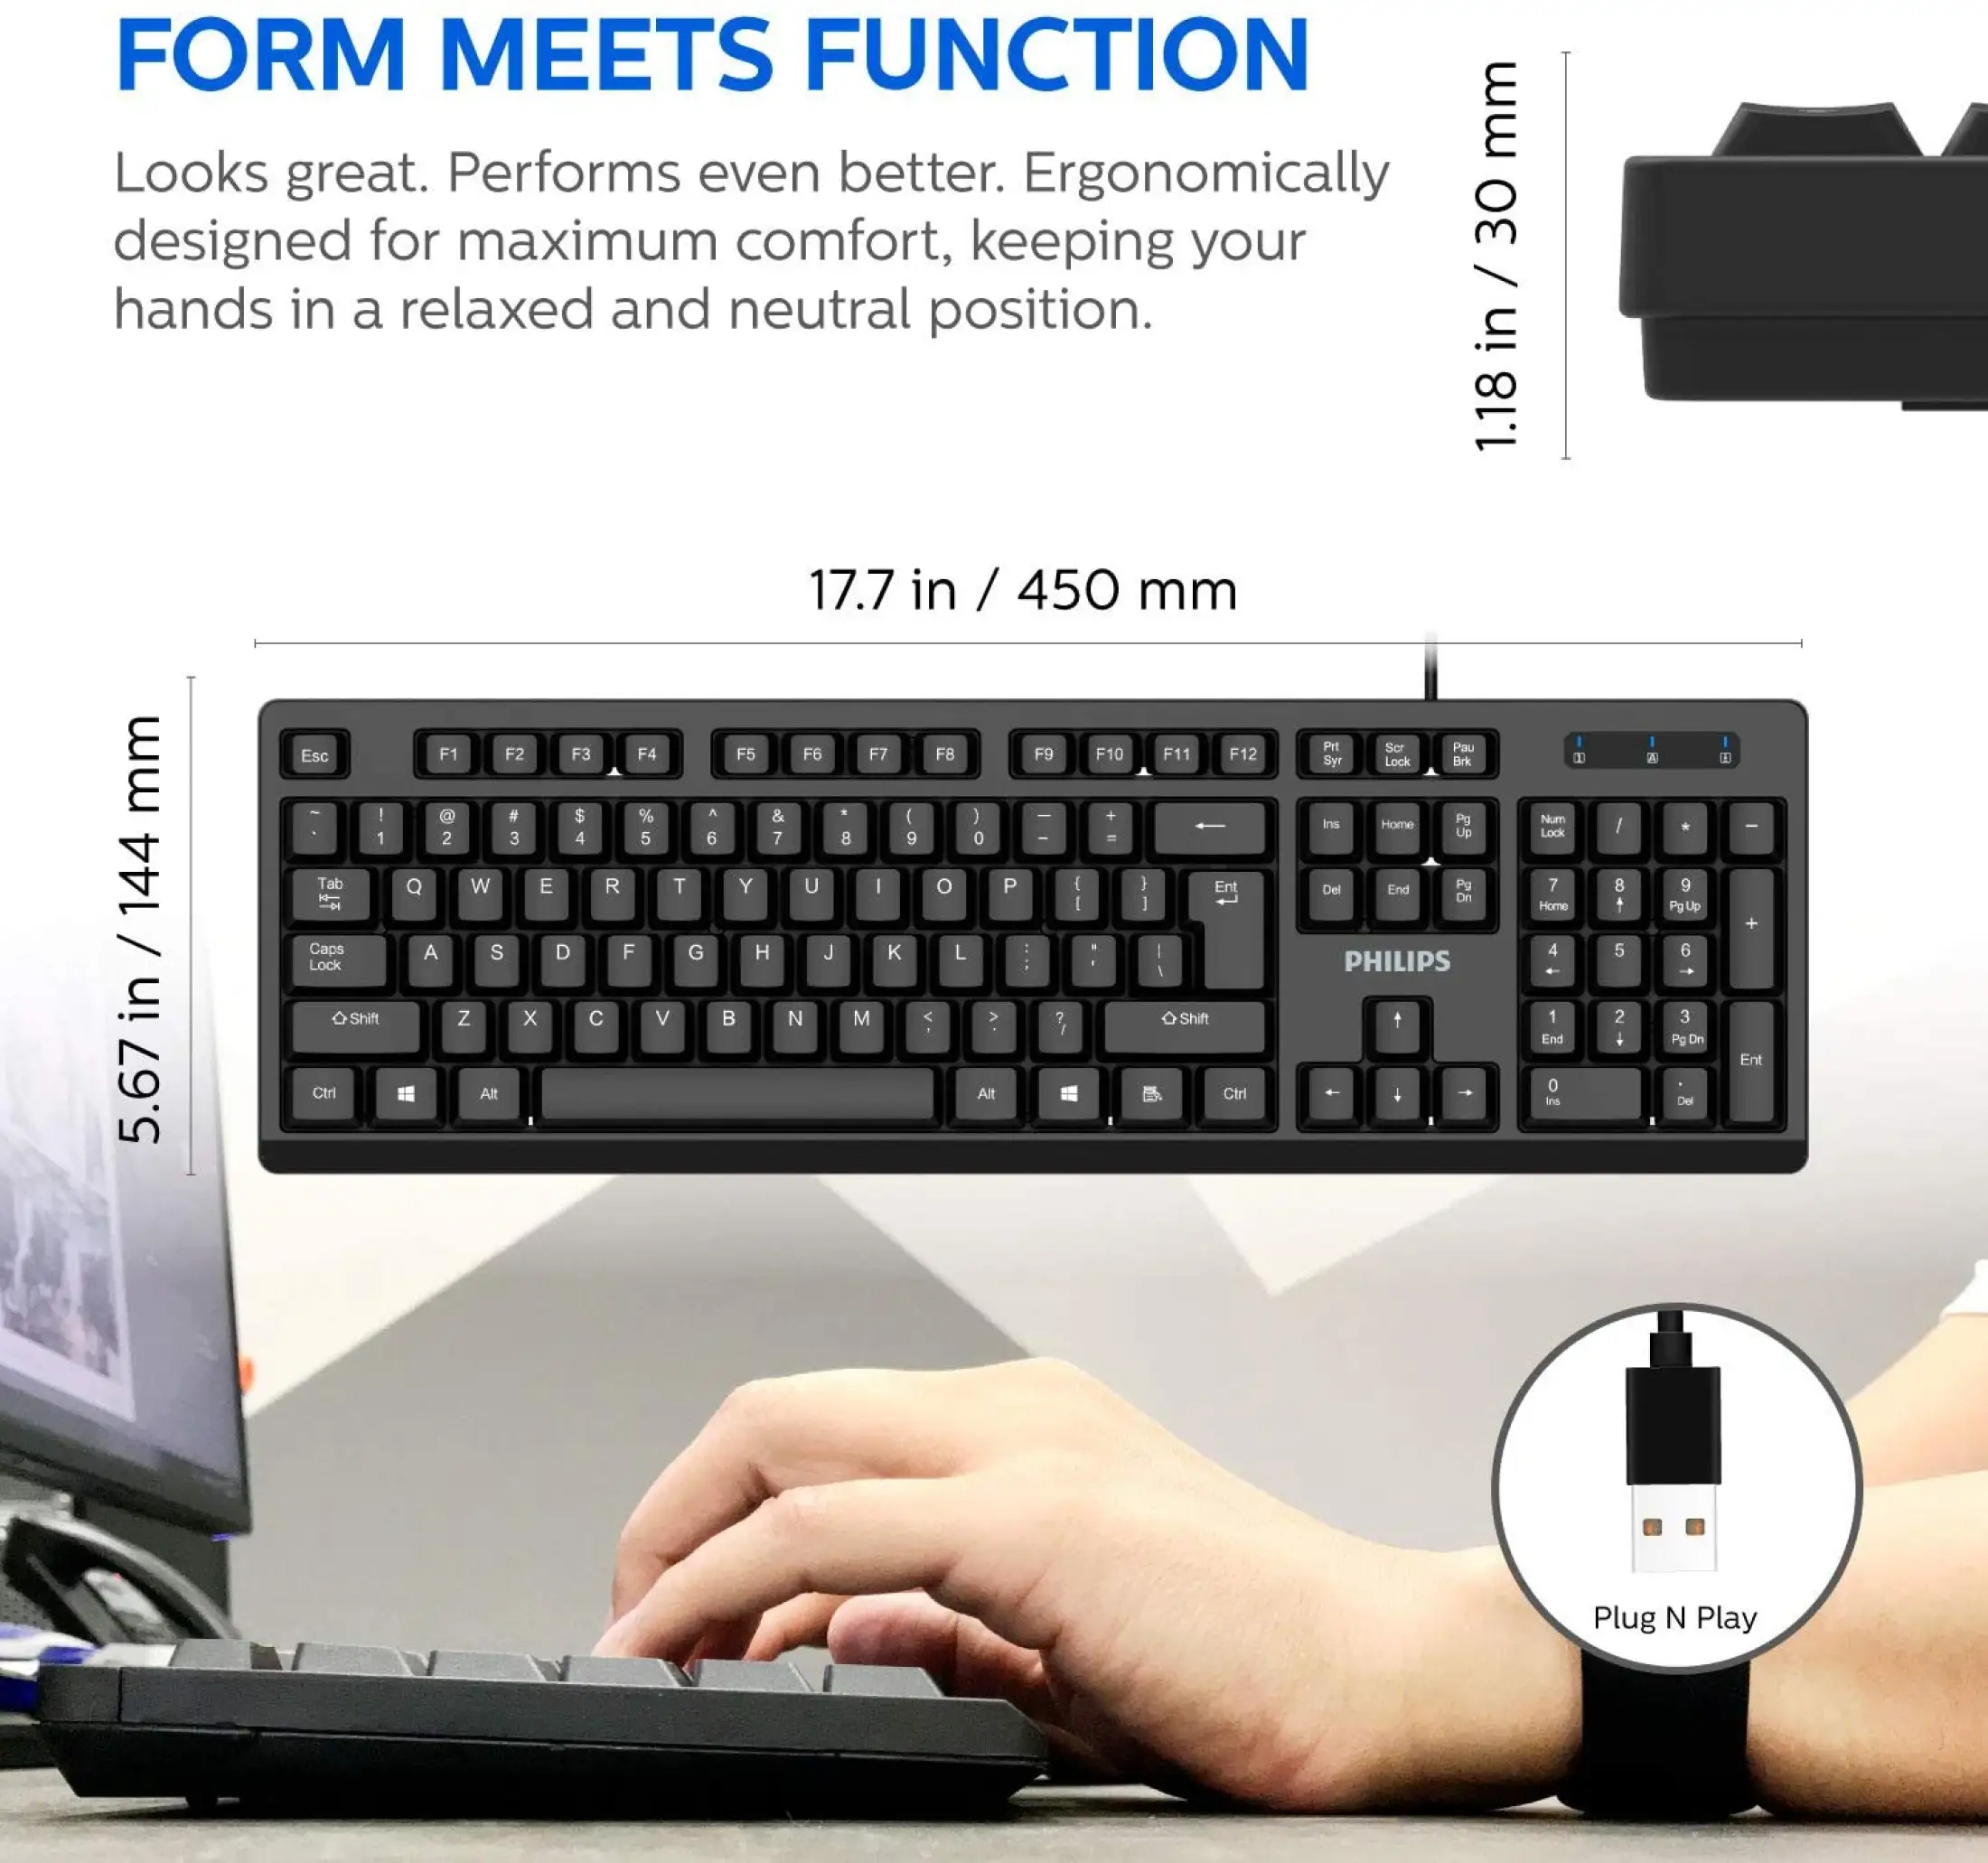 PHILIPS C234 (SPT6234) Ergonomic Wired USB Keyboard &amp; Mouse Combos set  combo for Home Office PC Laptop Desktop Computer Keyboard Set | Lazada PH